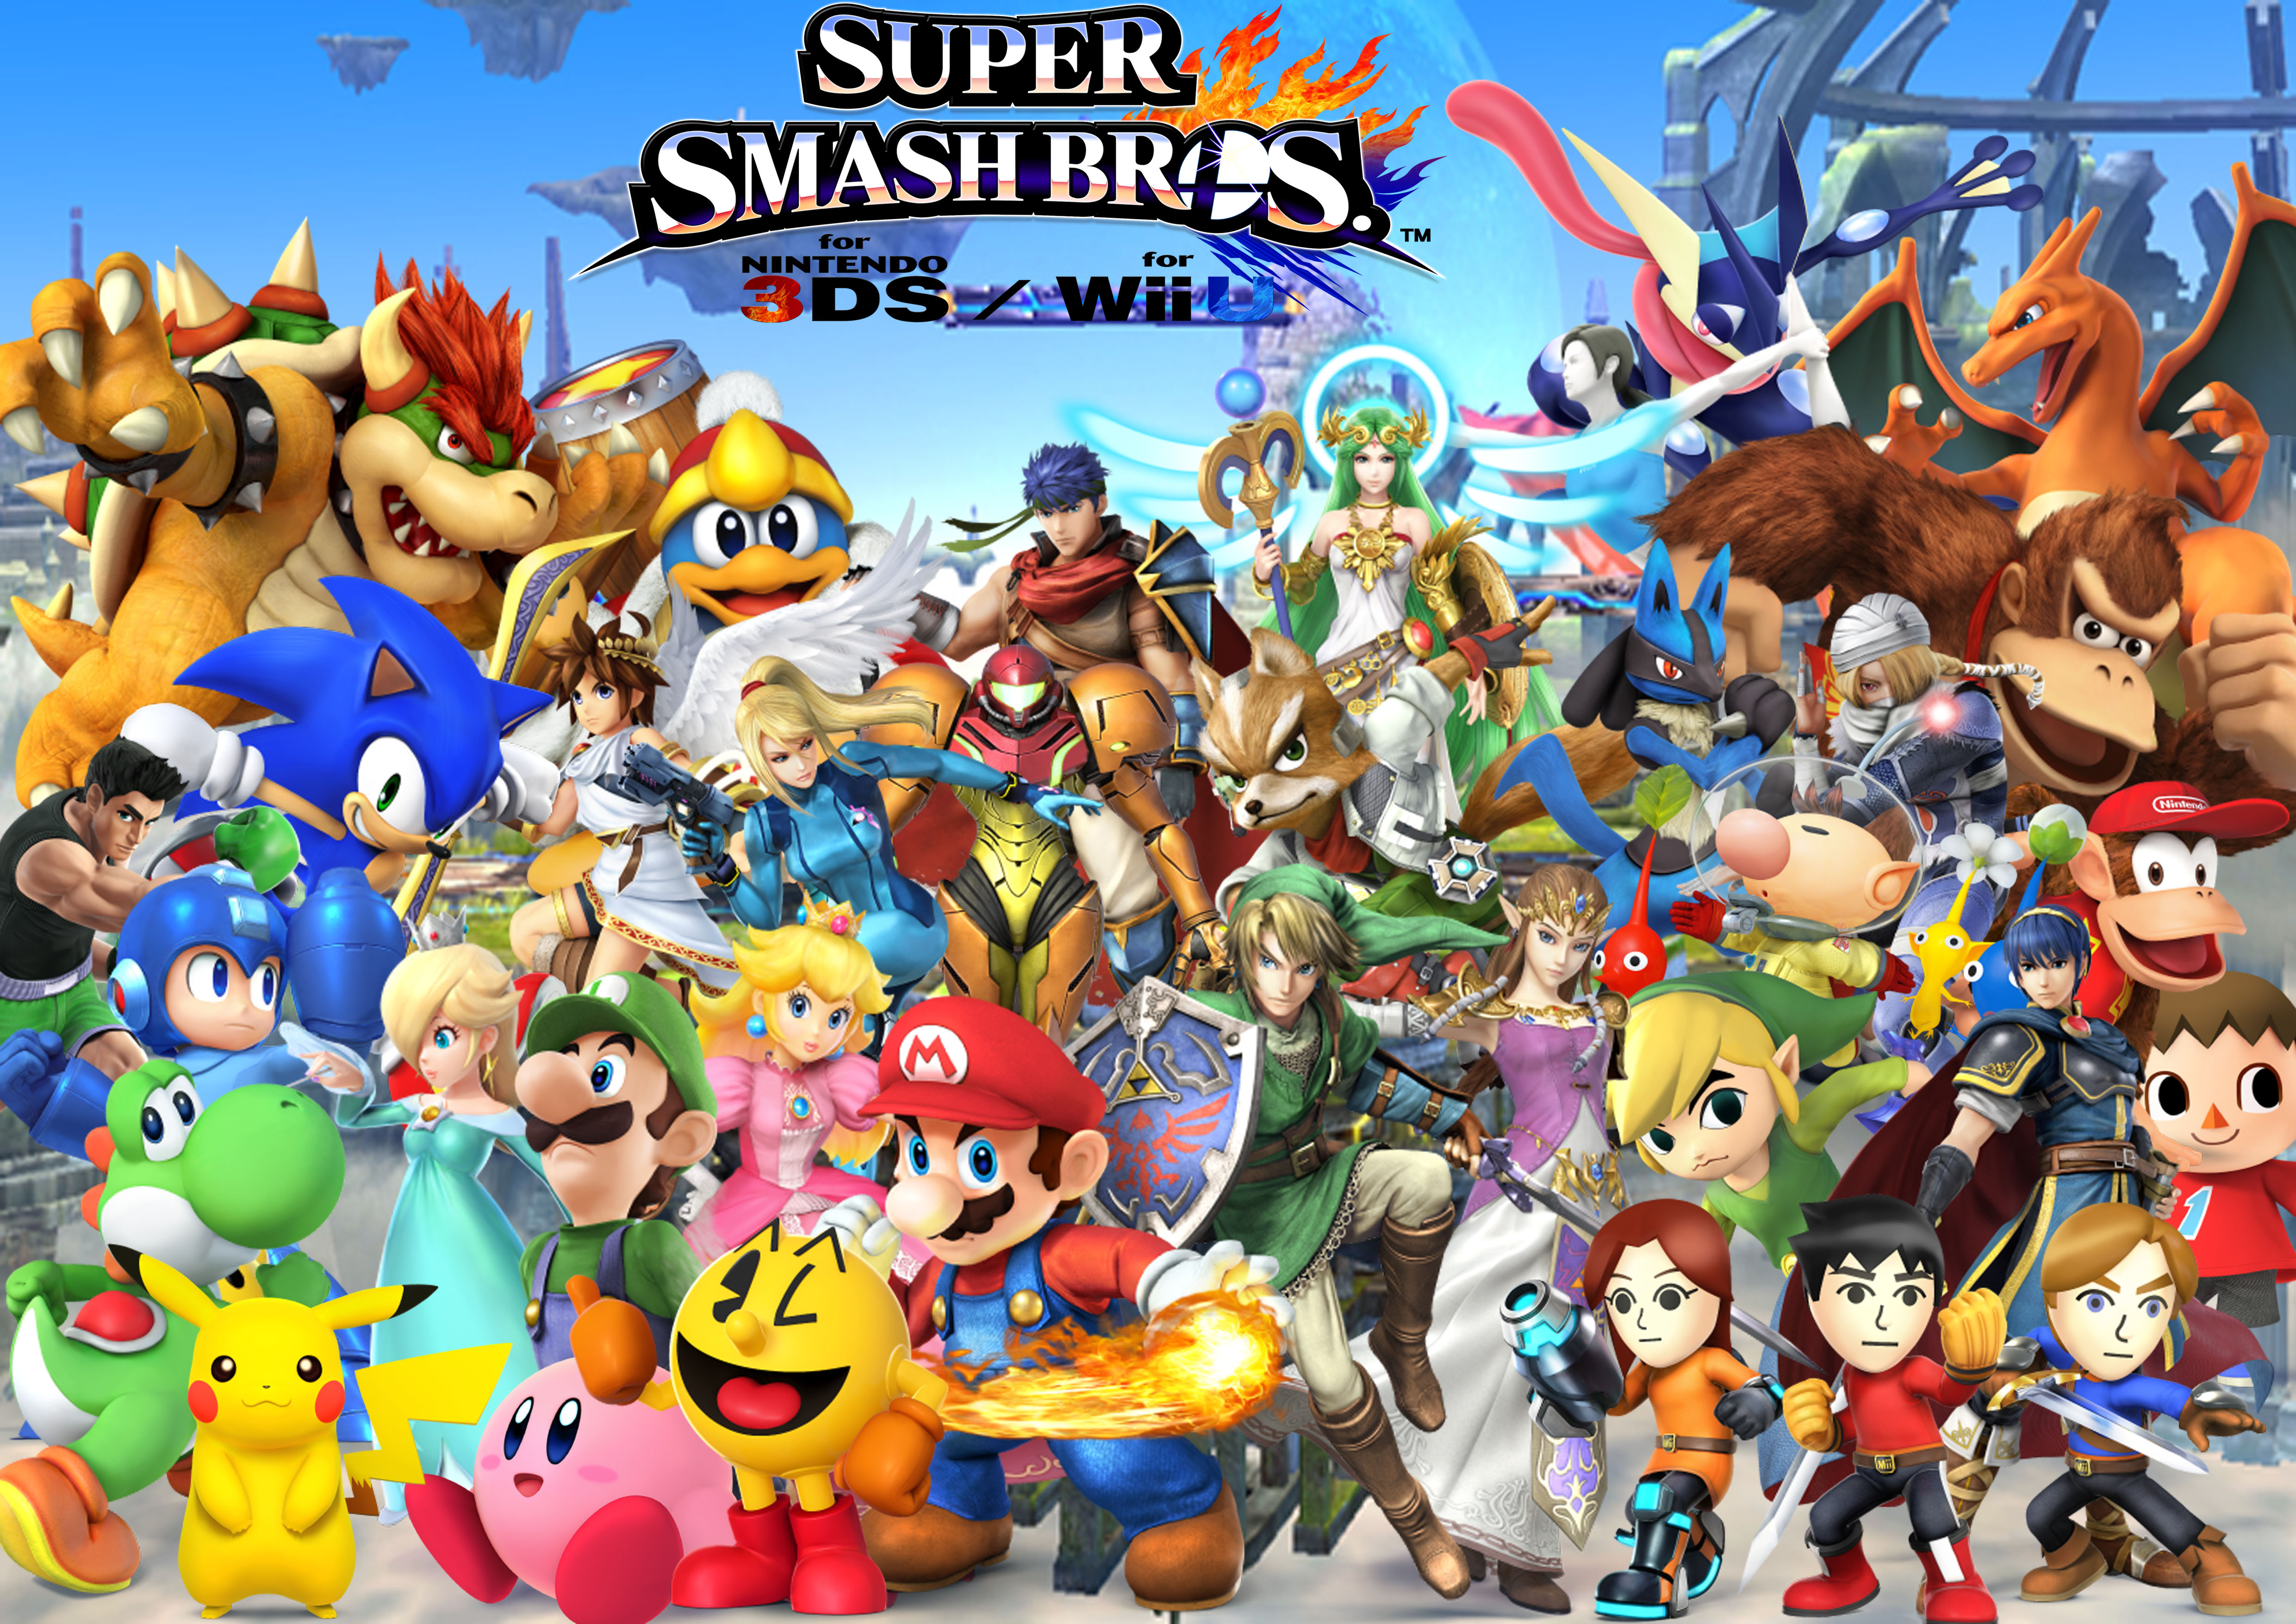 Super Smash Bros. For Nintendo 3DS And Wii U Backgrounds, Compatible - PC, Mobile, Gadgets| 4961x3508 px